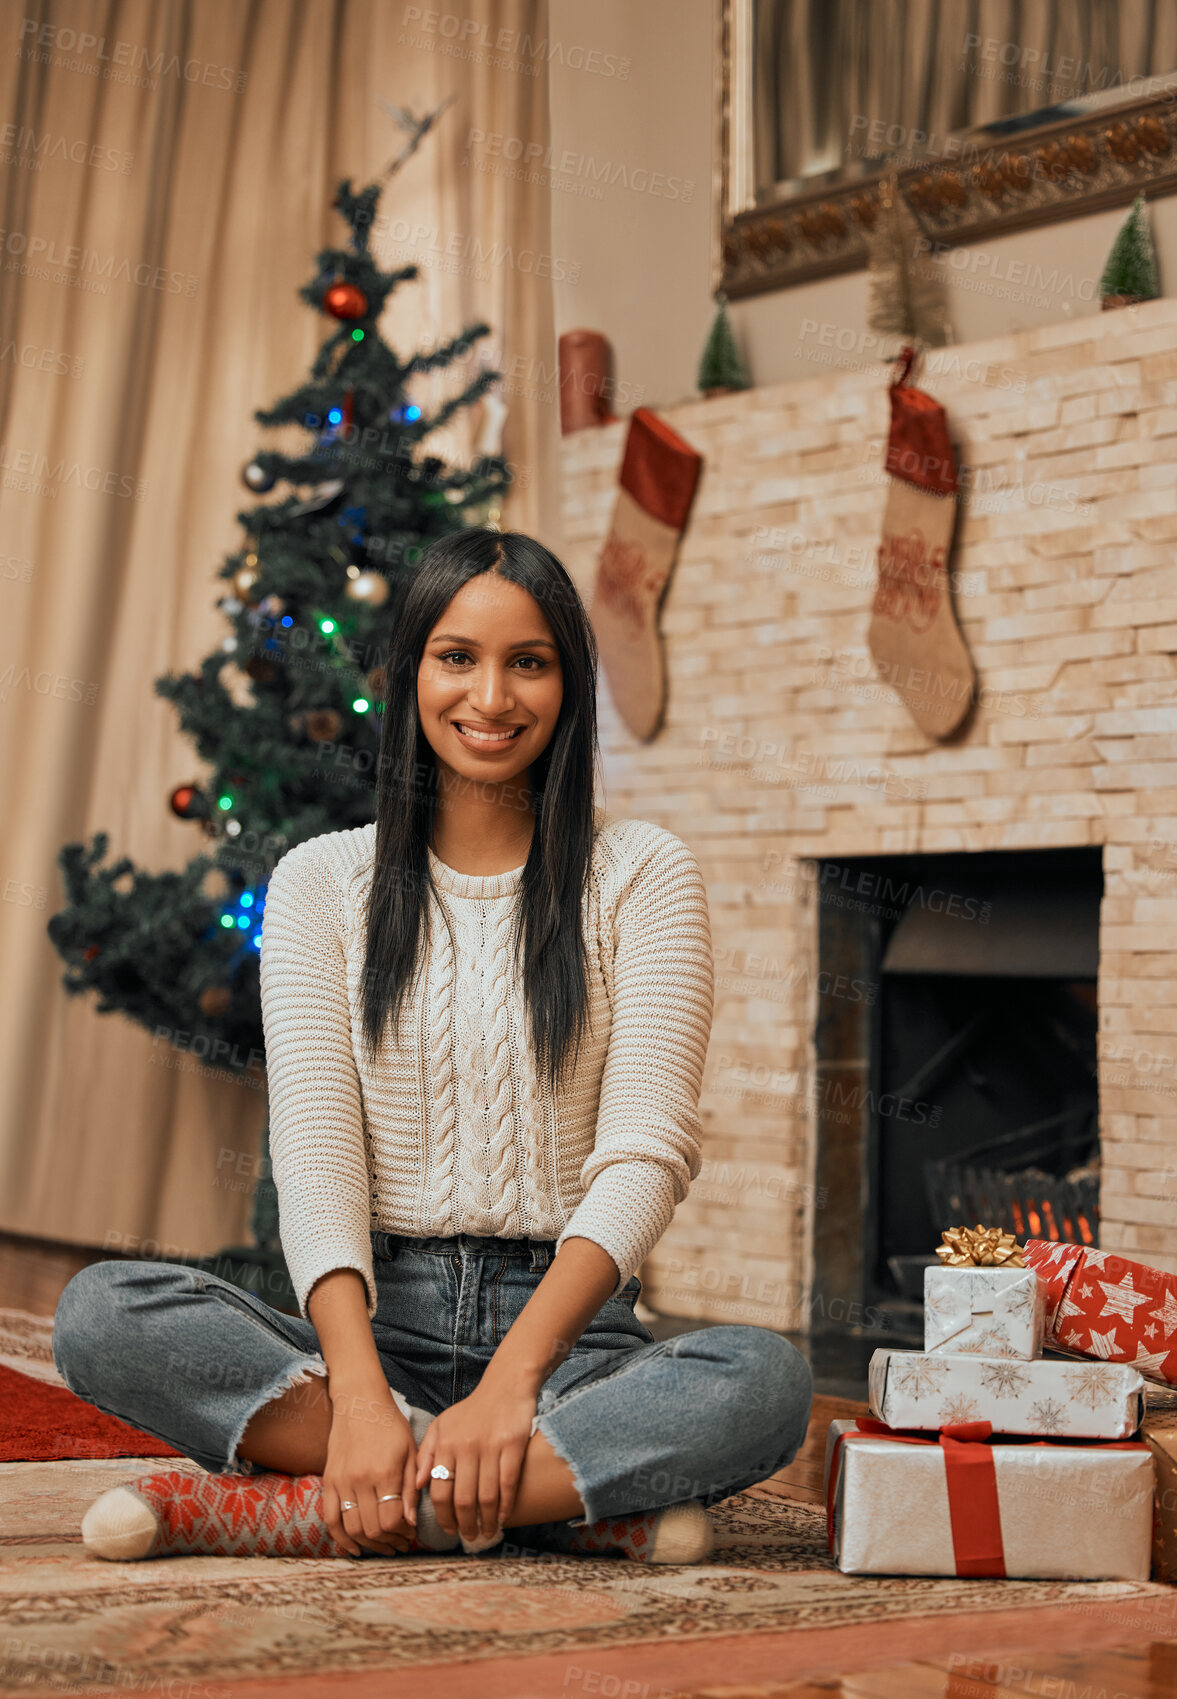 Buy stock photo Portrait of a young woman celebrating Christmas at home